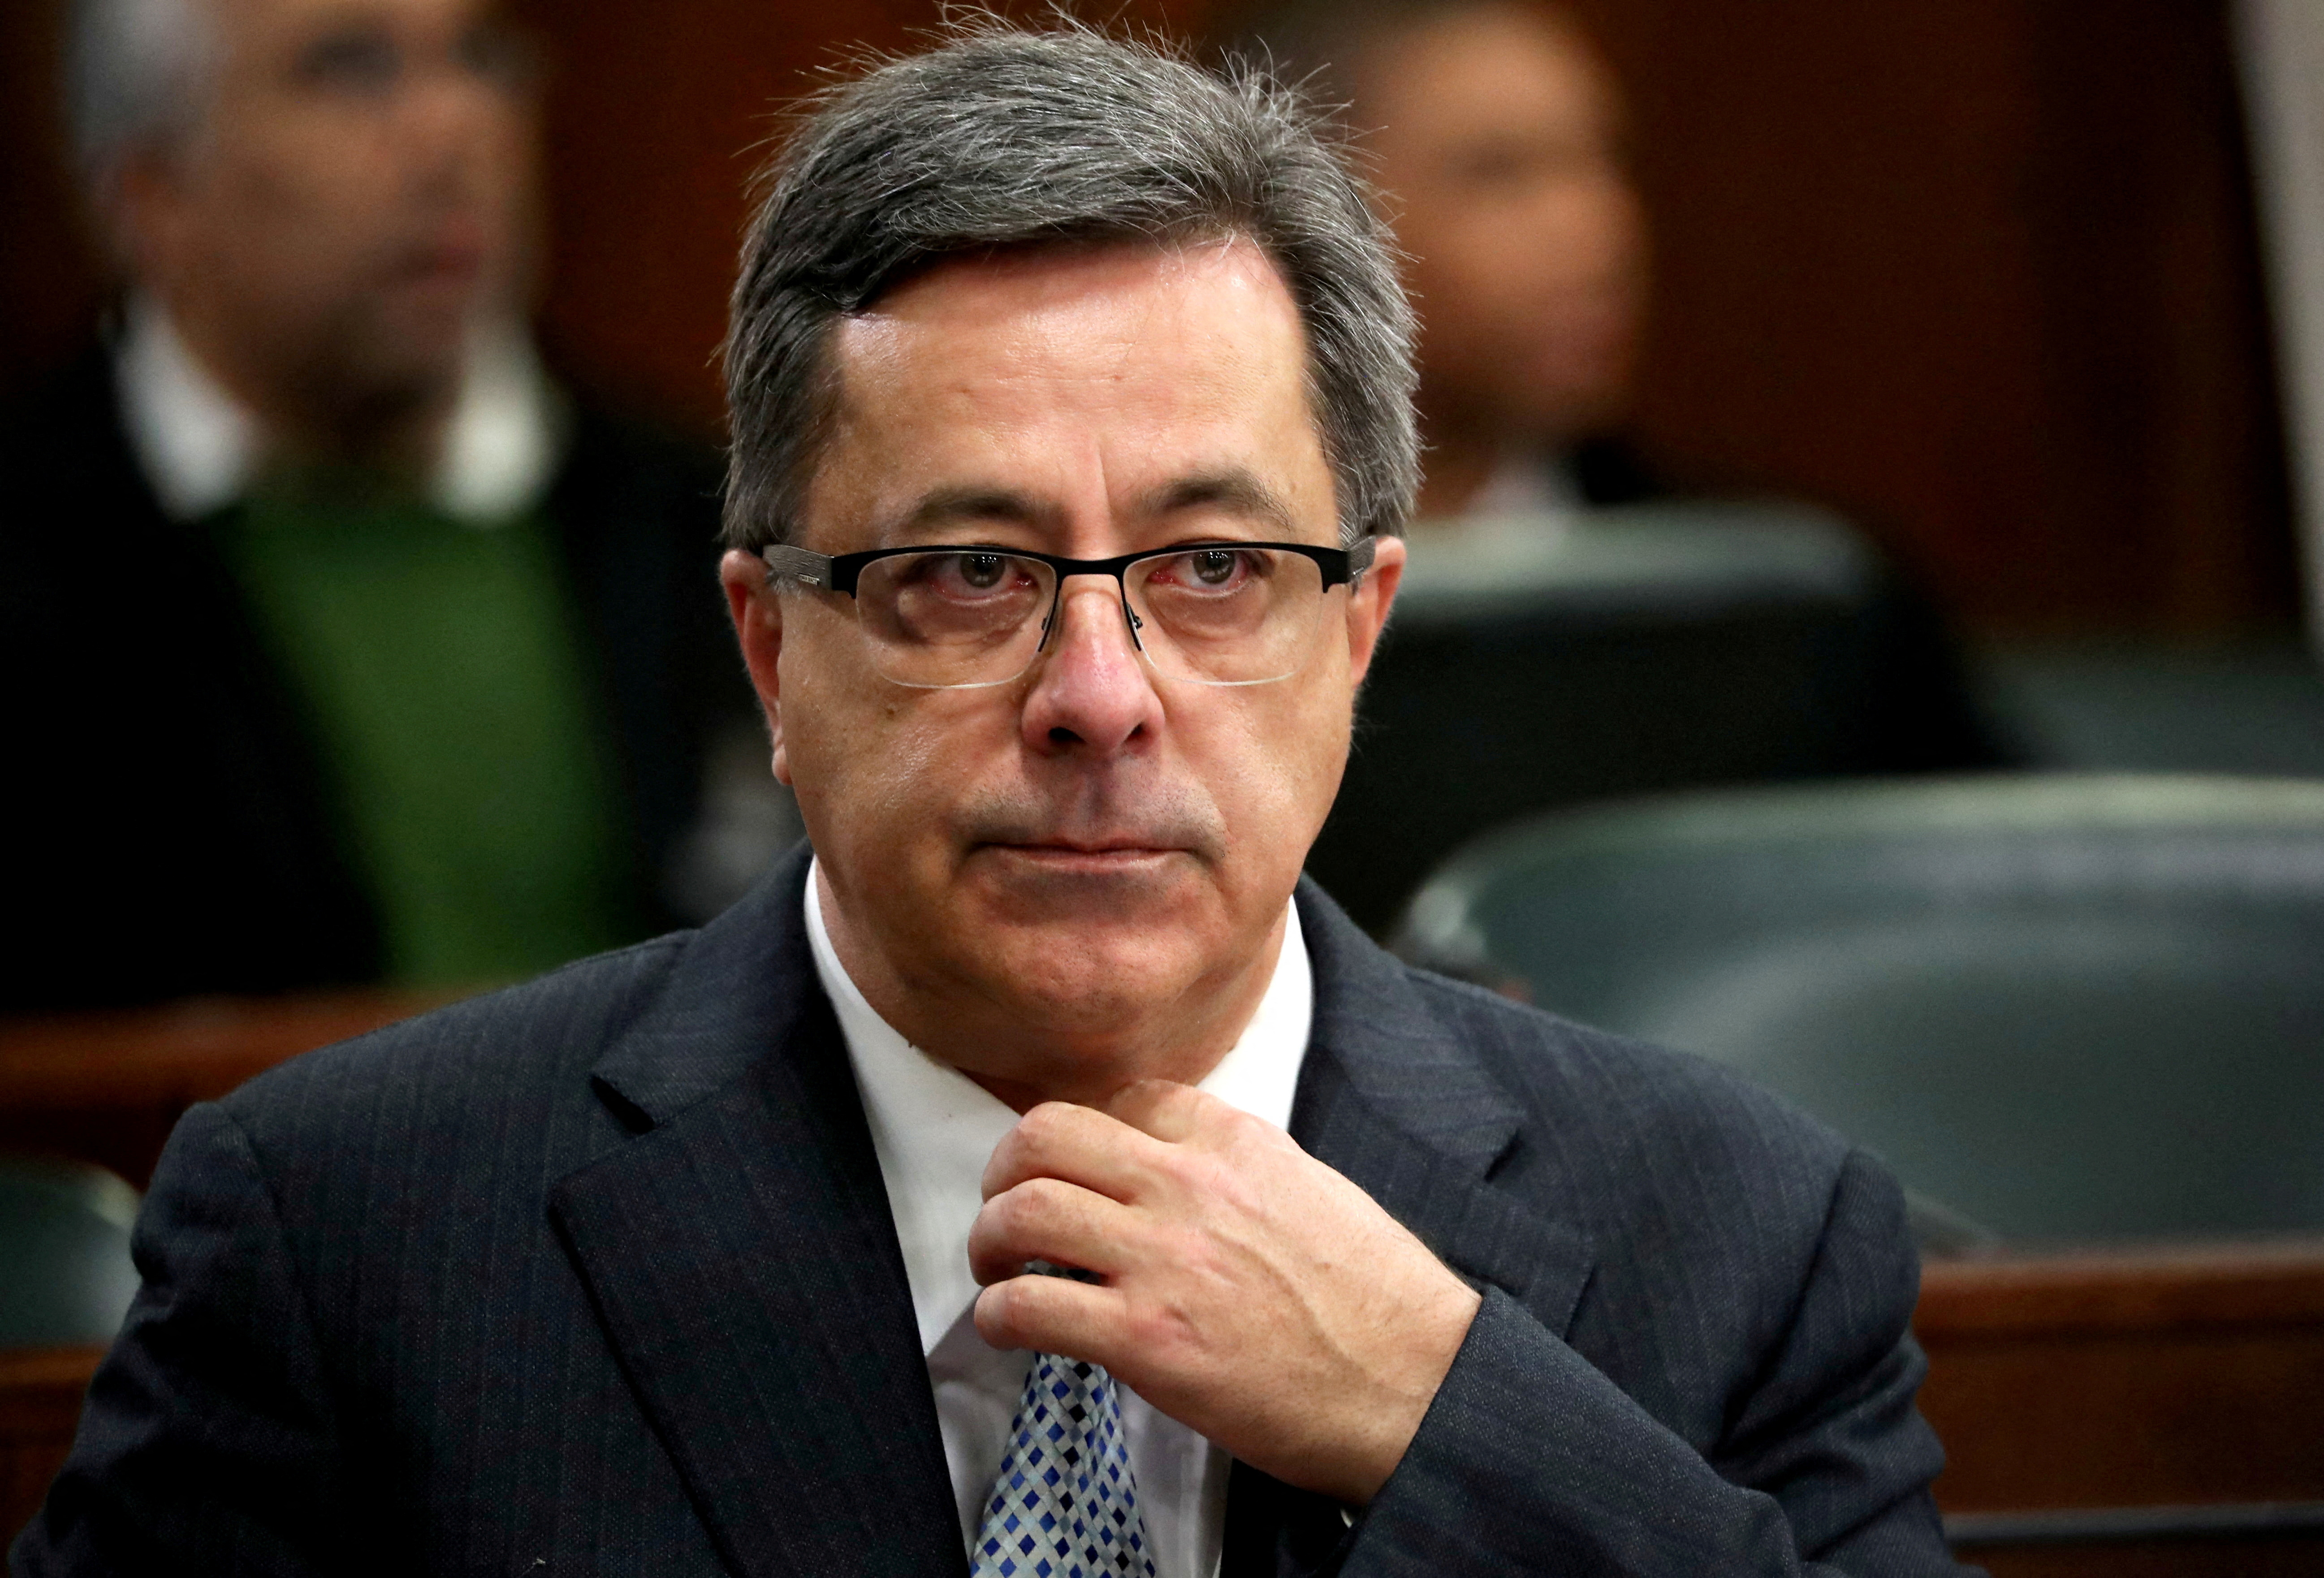 Steinhoff's former Chief Executive Markus Jooste appears in parliament to face a panel investigating an accounting scandal that rocked the retailer in Cape Town